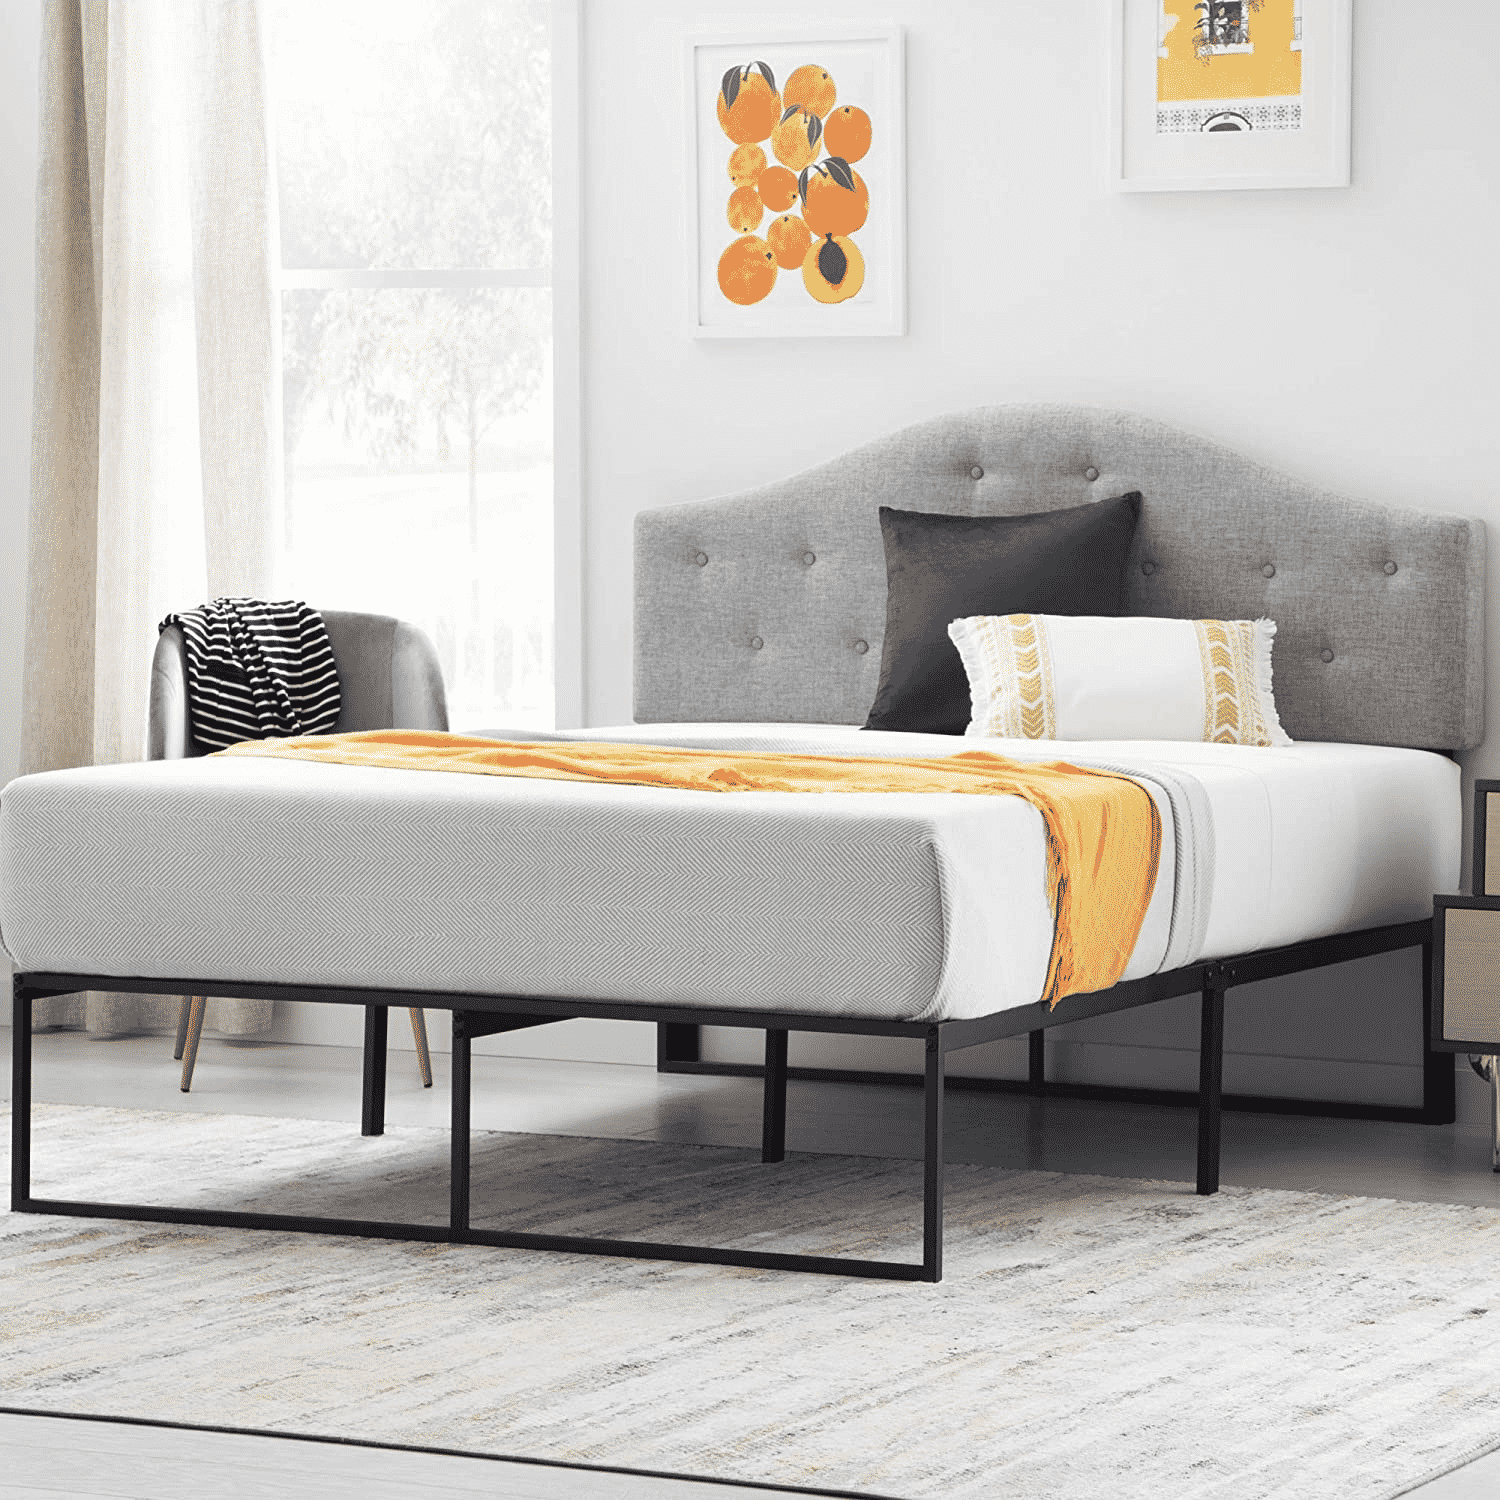 Even a small variation in size between the mattress and the frame can affect the bed’s overall performance.